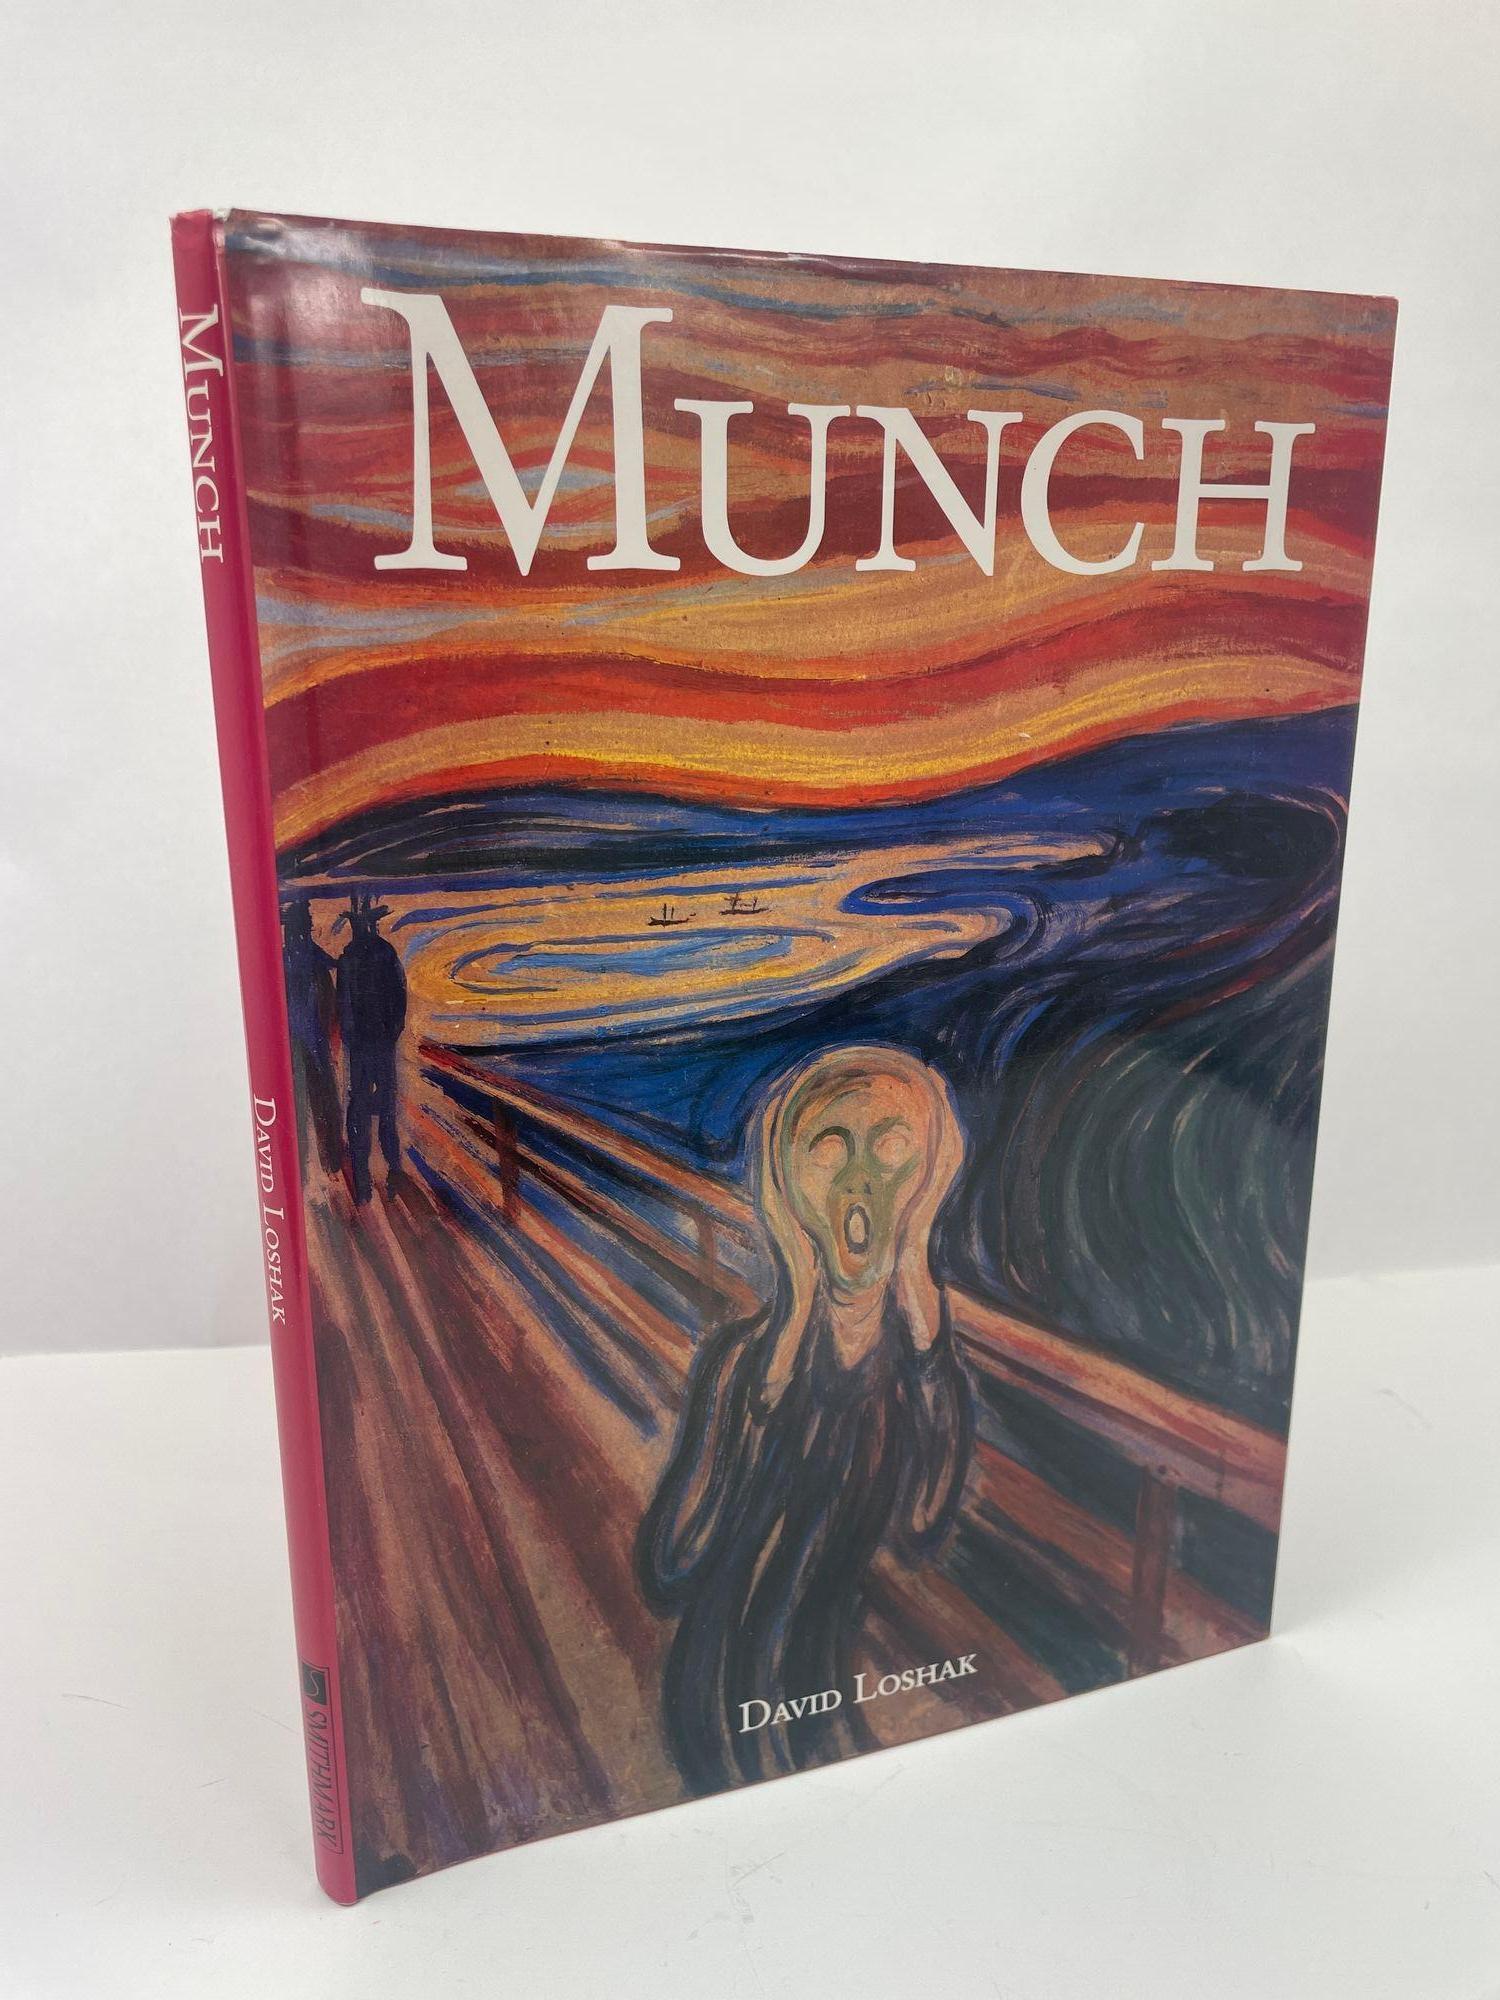 " Munch " Expressionist Hardcover Art Book First Edition 1990 by David Loshak For Sale